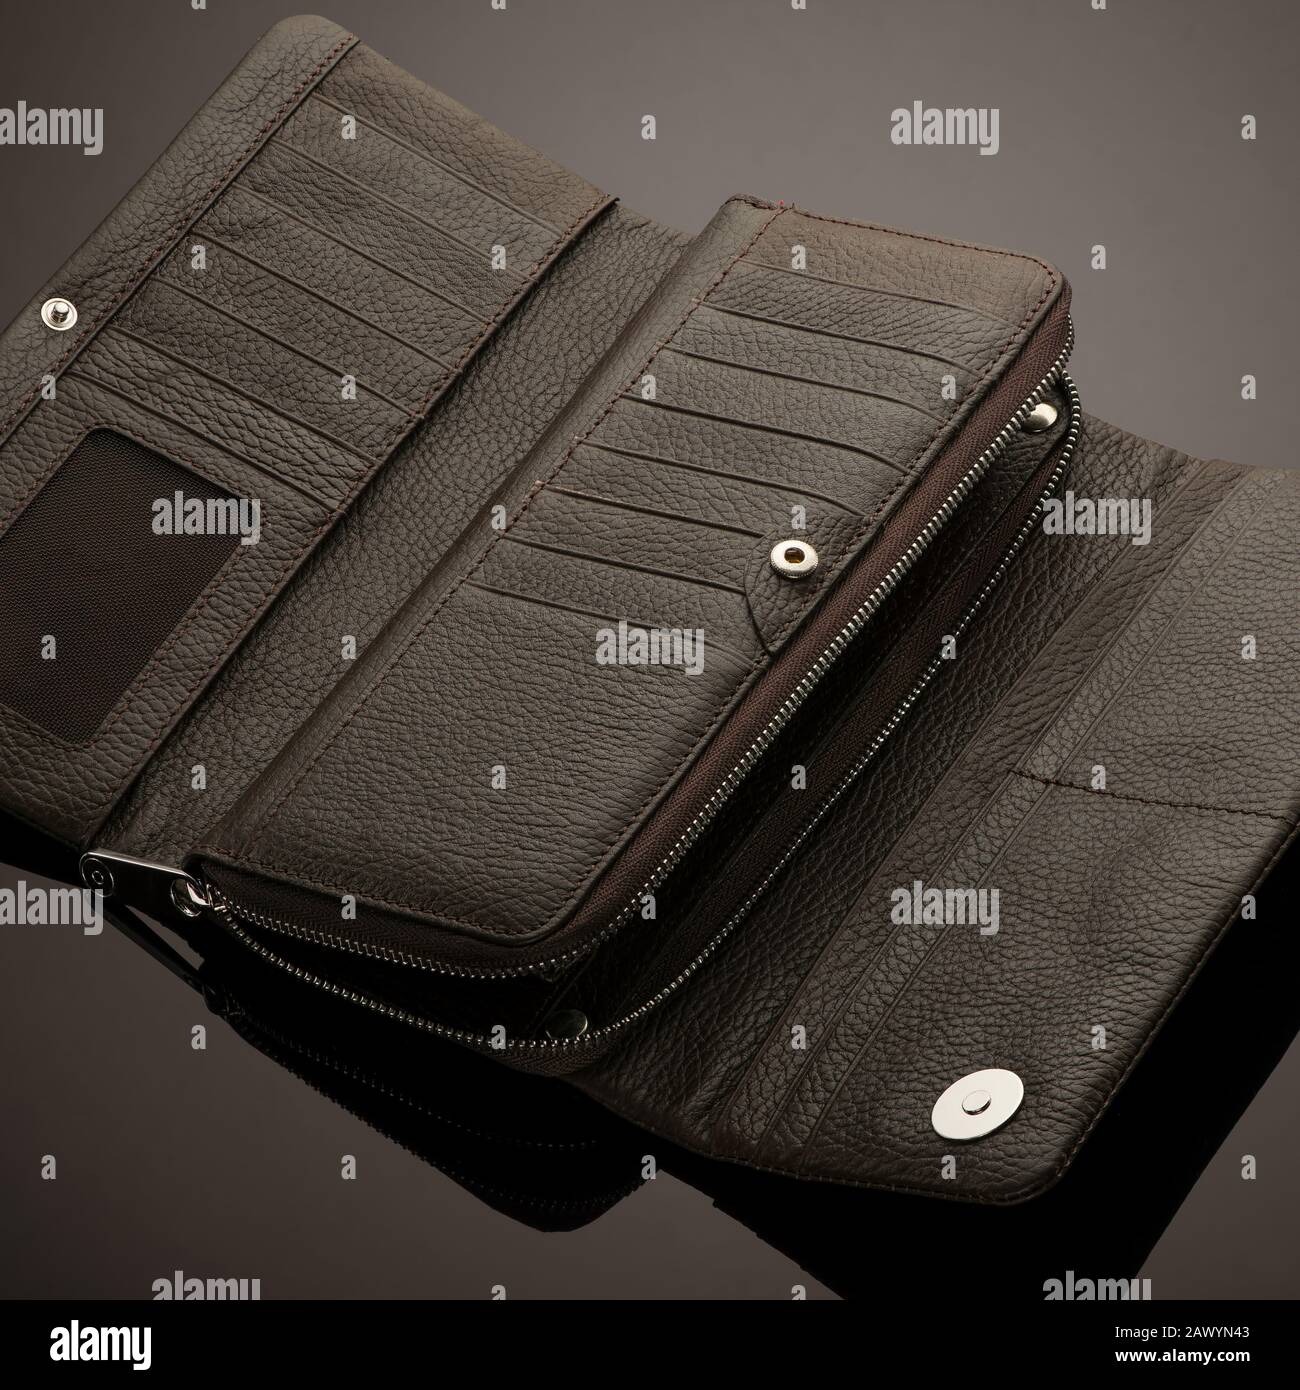 Fashionable leather men's wallet on a dark background Stock Photo